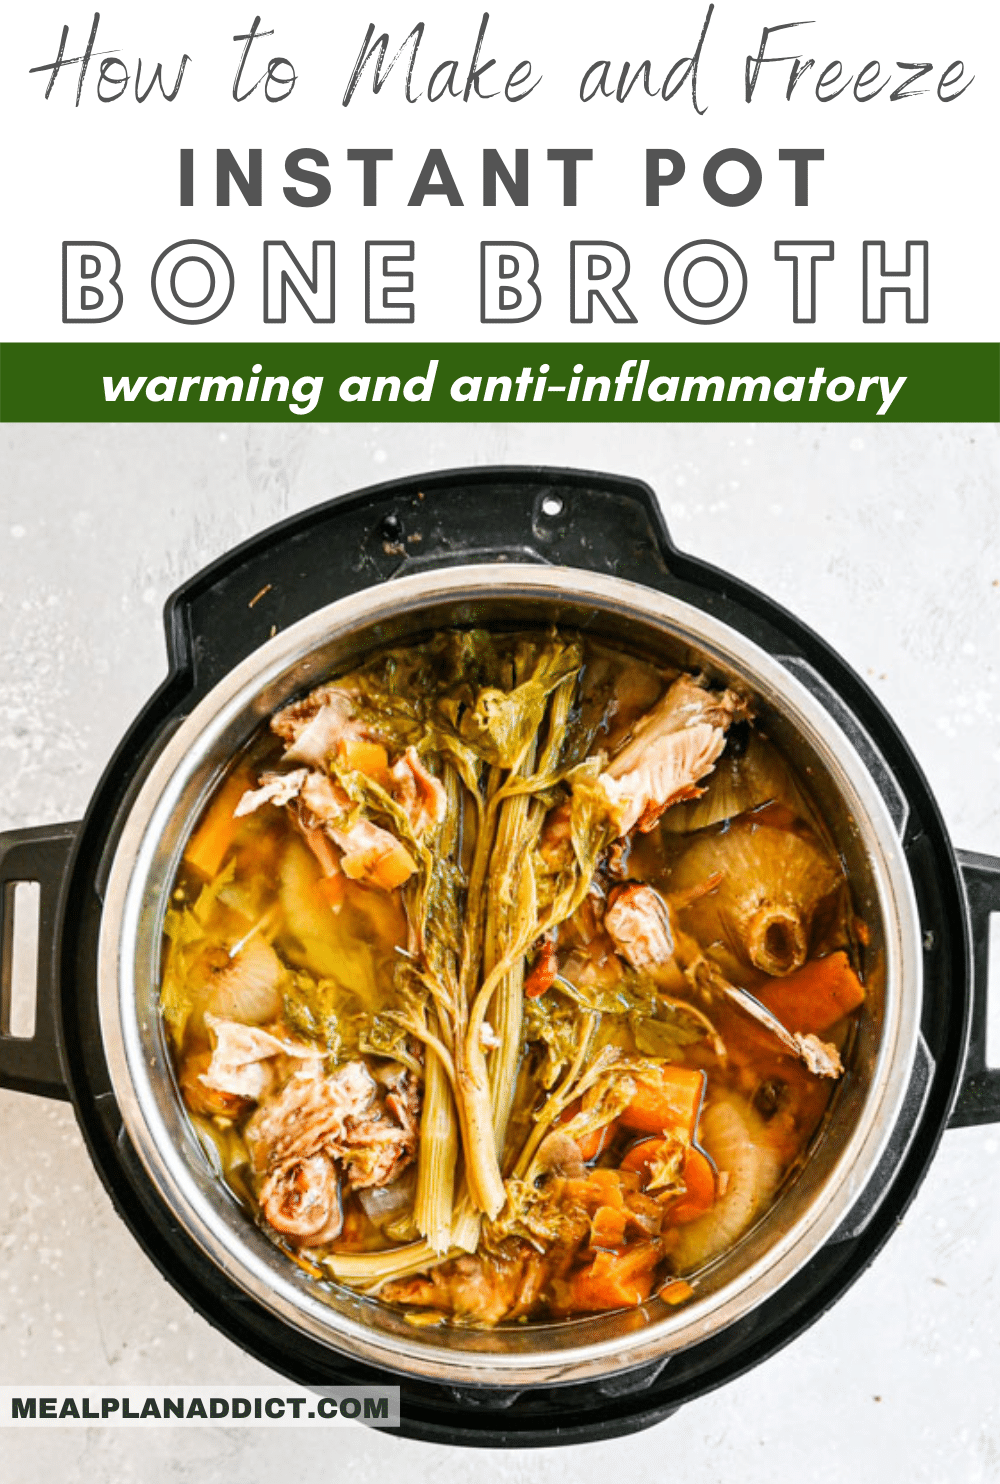 How to make and freeze instant pot bone broth